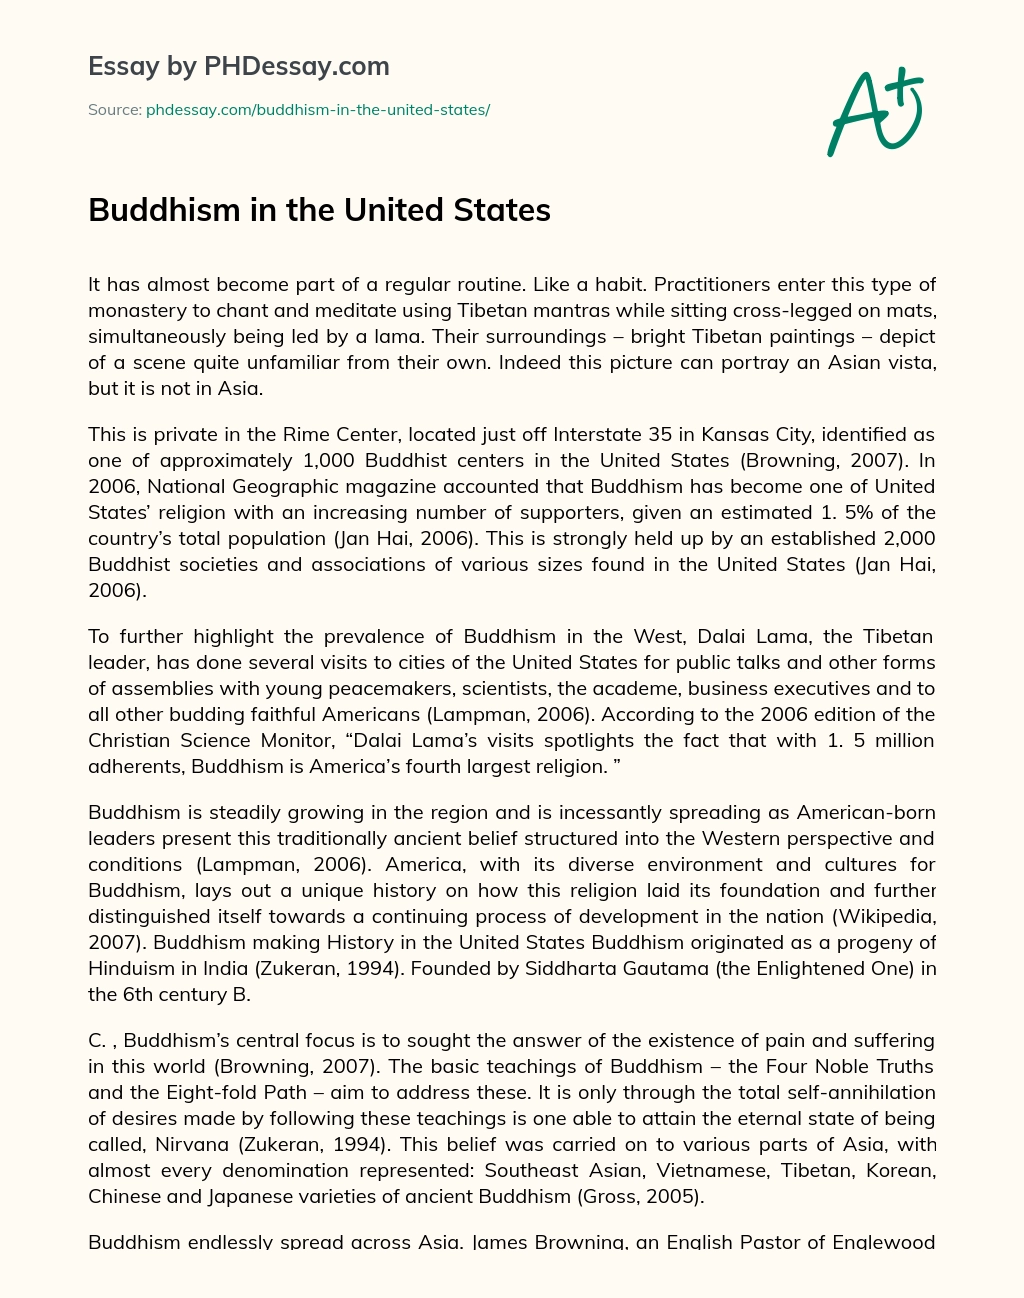 Buddhism in the United States essay